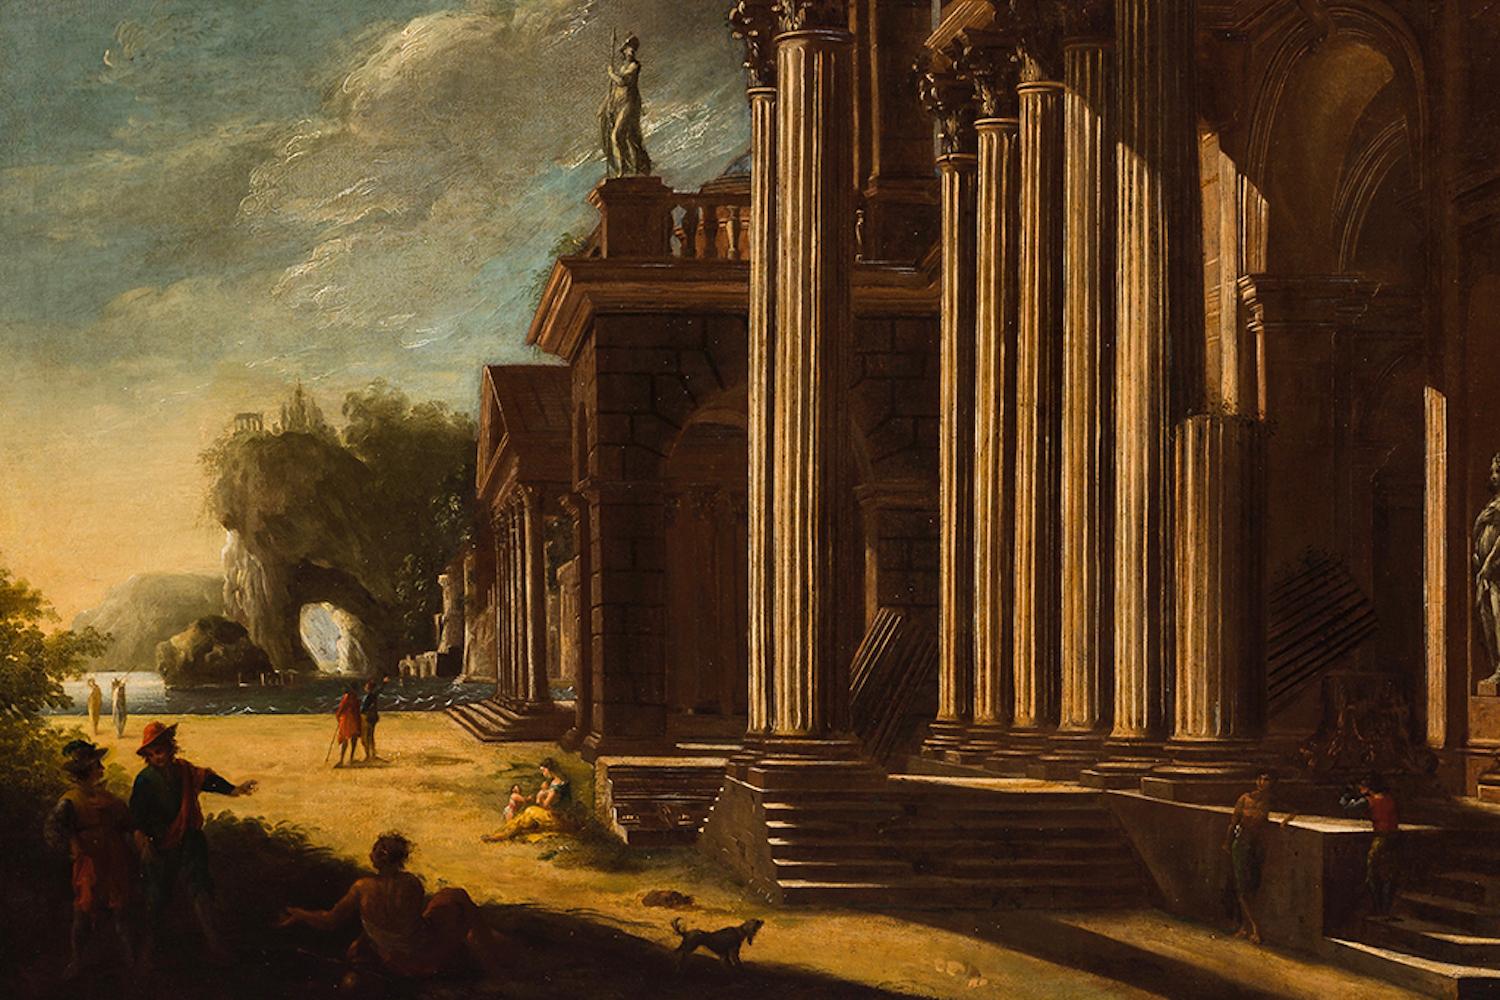 Hand-Painted Architectural Capriccio Ruins and Herds Painting, 18th Century, Unsigned, Italy